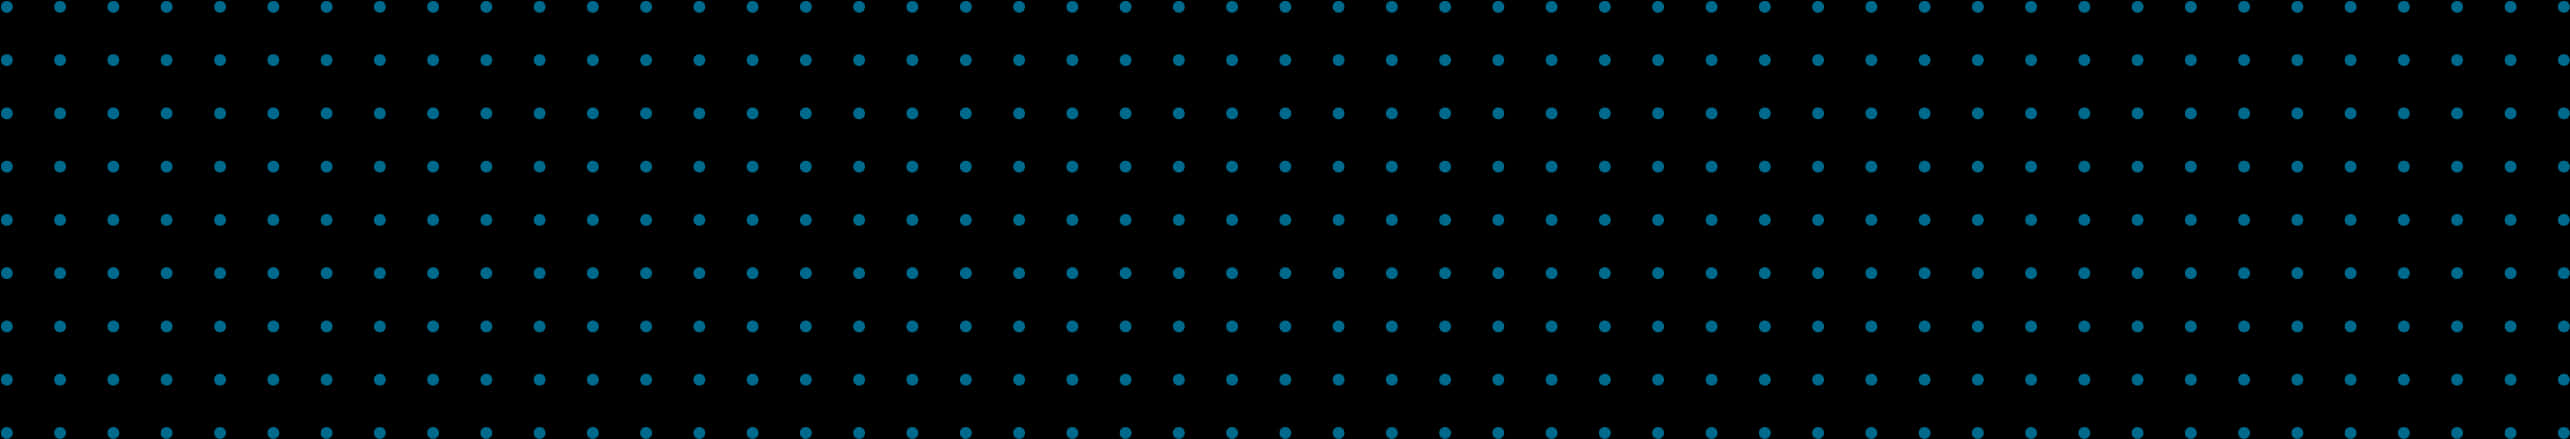 A Black Background With Blue Dots